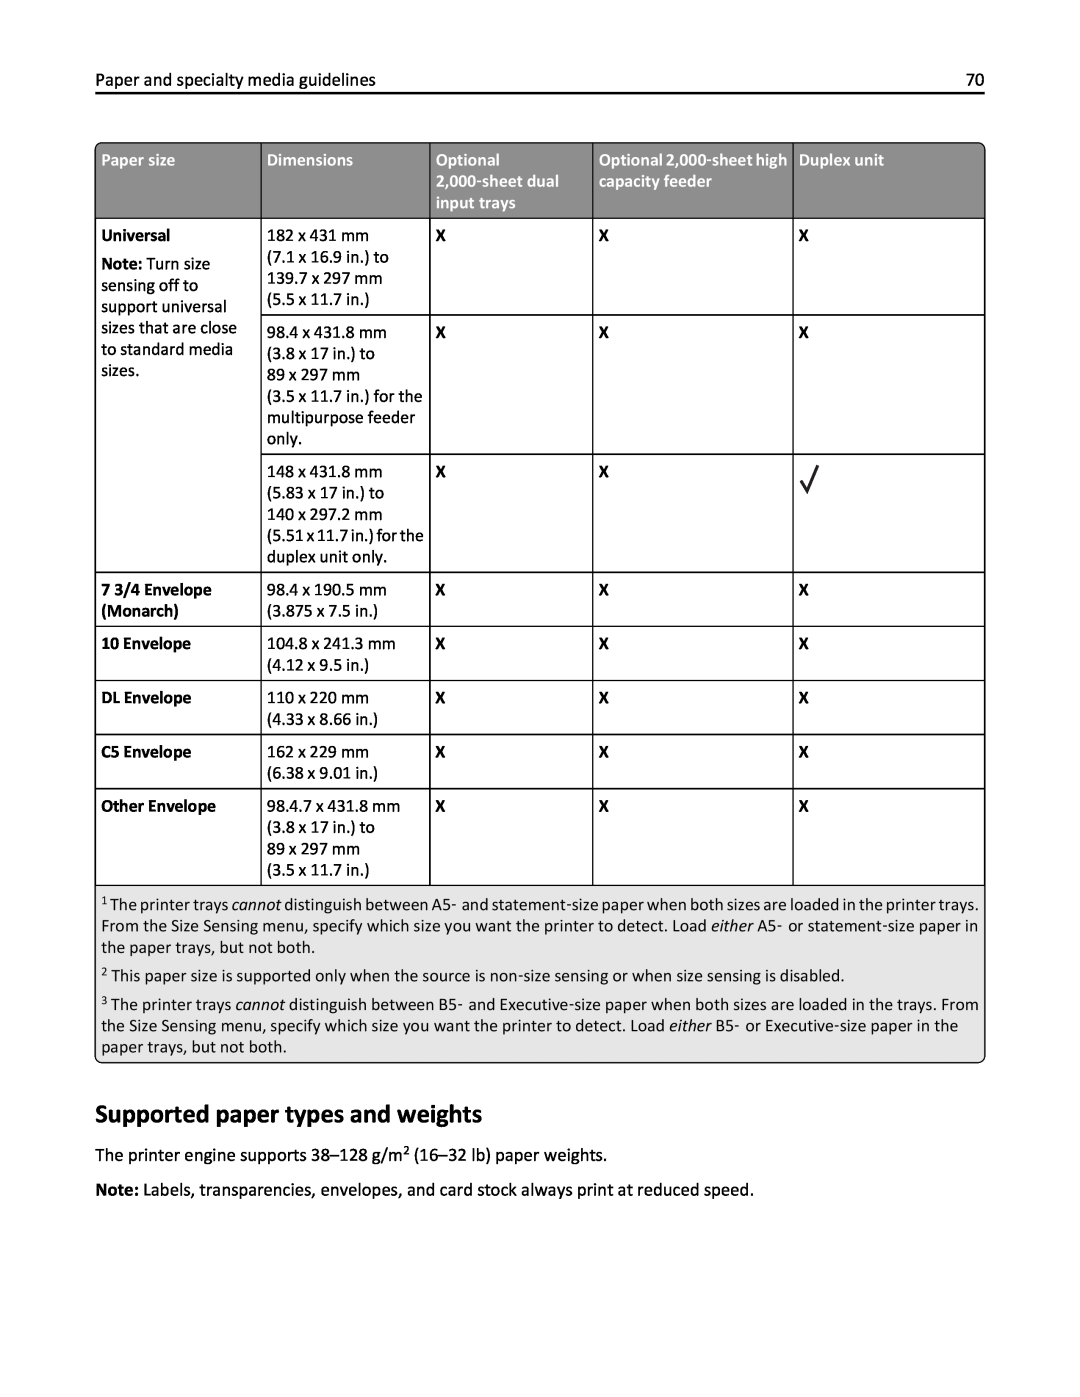 Lexmark X860DE Supported paper types and weights, Paper and specialty media guidelines, Paper size, Dimensions, Optional 